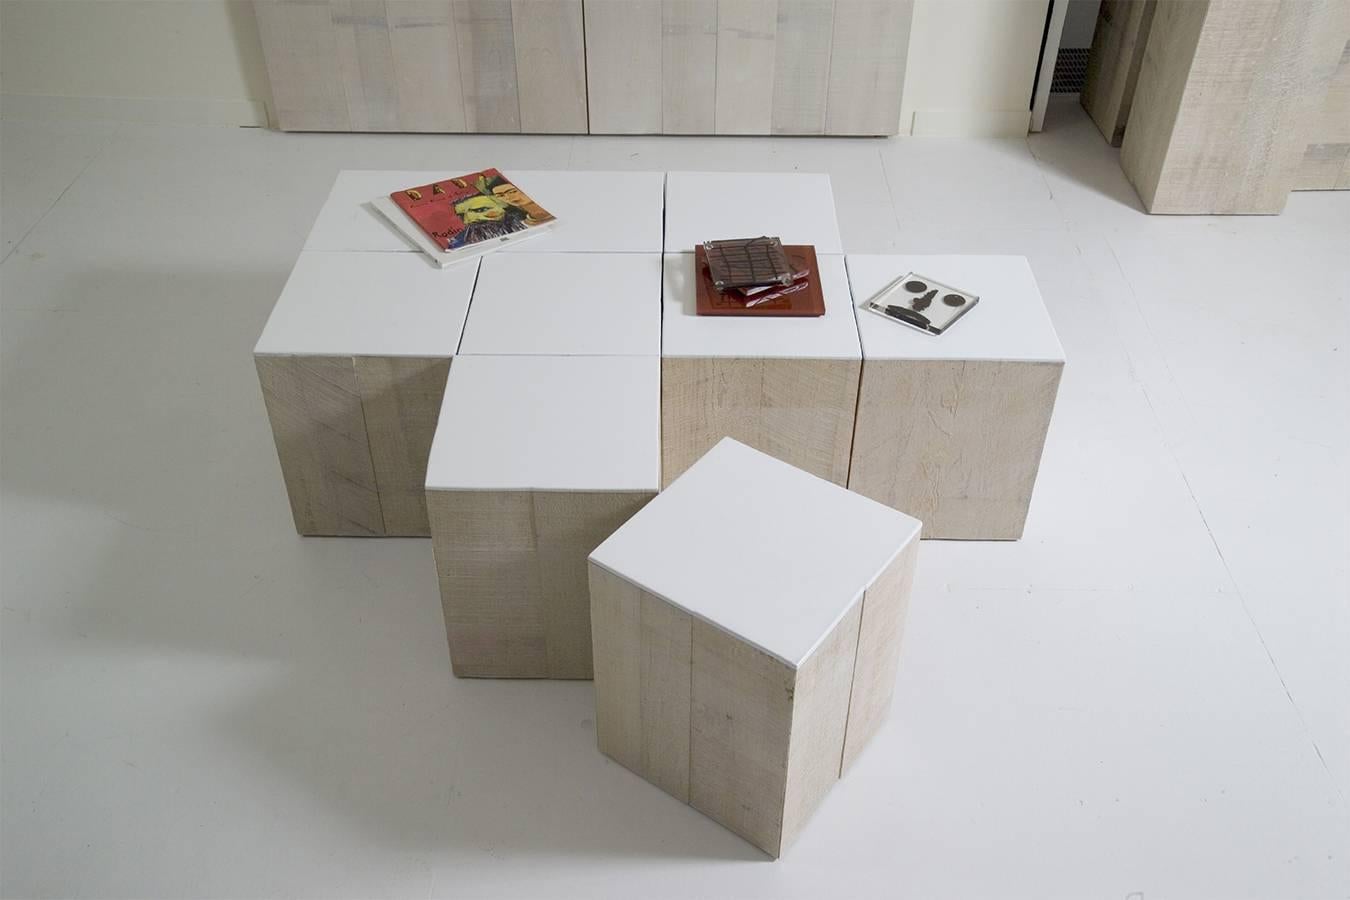 Crossword coffee table cubes can be used and moved anywhere as a convenient surface.

White washed wood sides and gloss top surface.

Measure: 12